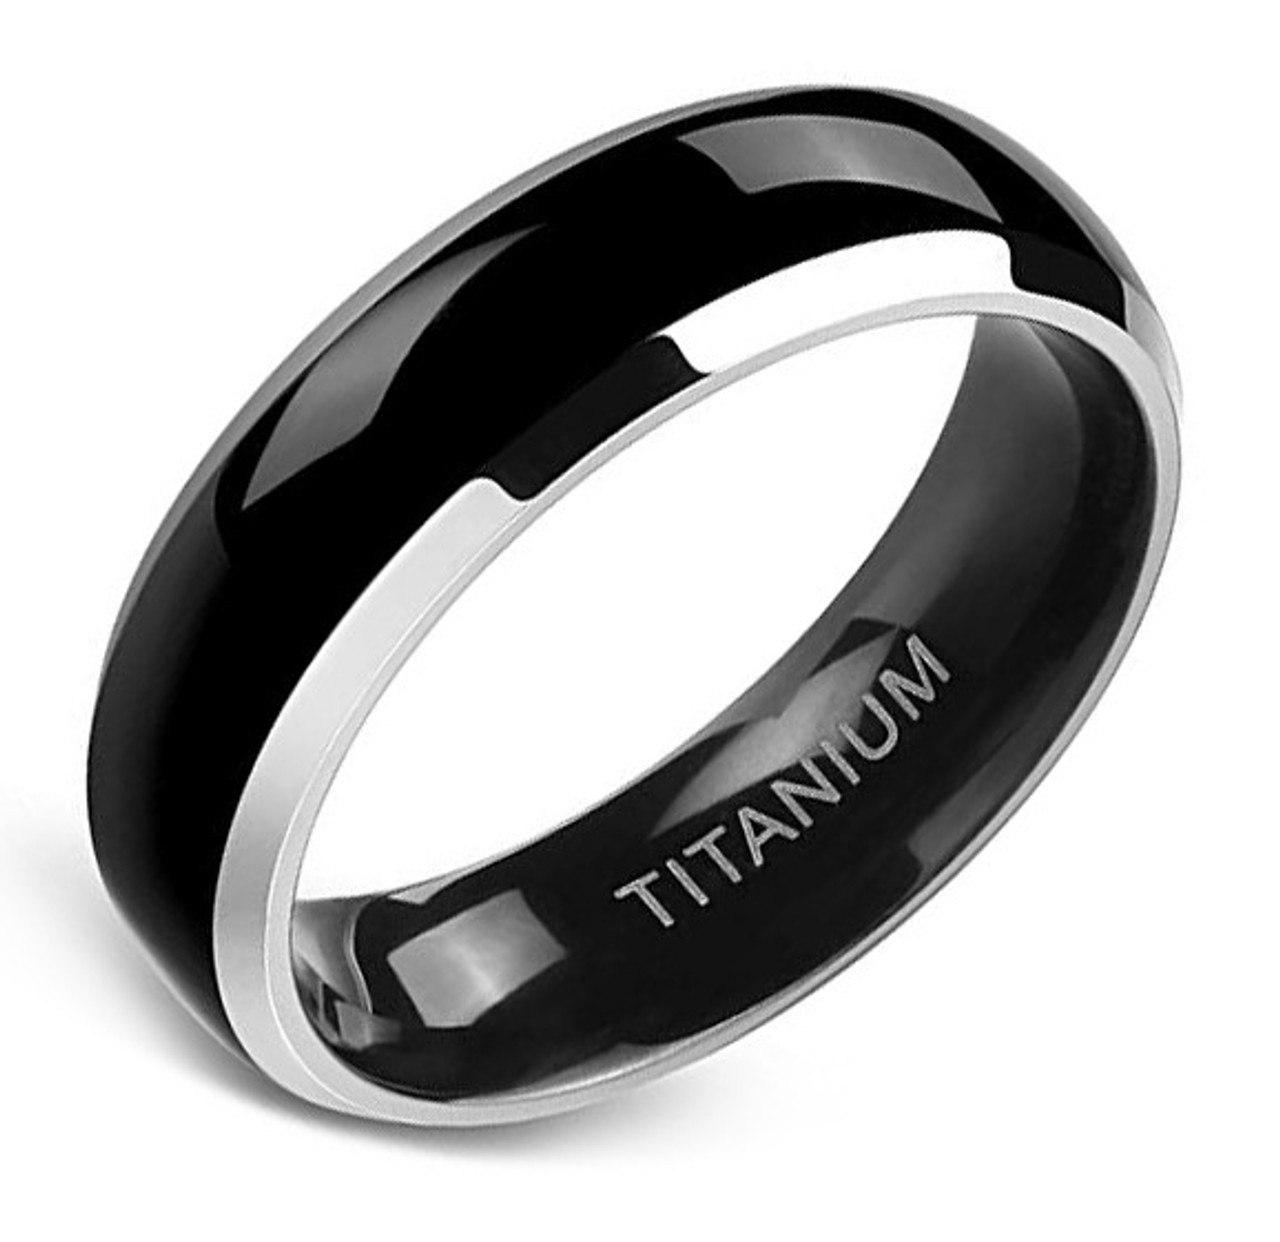 6mm - Unisex (Women's or Men's) Black and Silver Two Tone Titanium Wedding Bands. High Polish Finish - Comfort Fit Ring is Light Weight